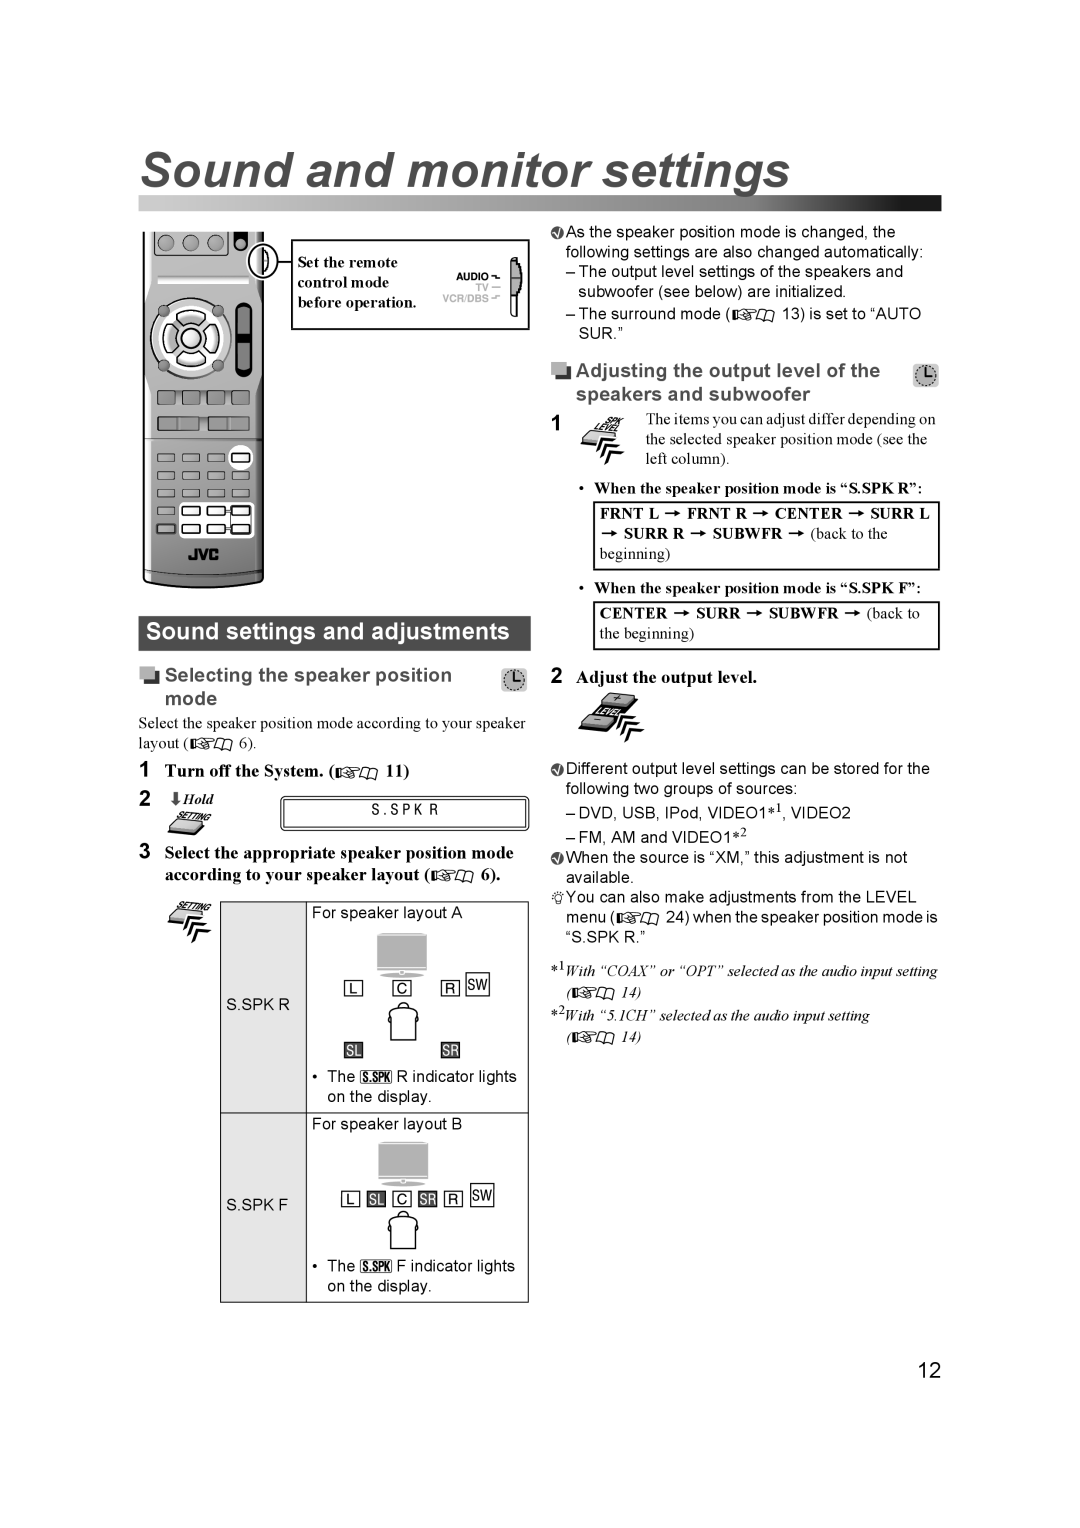 JVC THD60 manual Sound and monitor settings, Sound settings and adjustments, Selecting the speaker position mode 